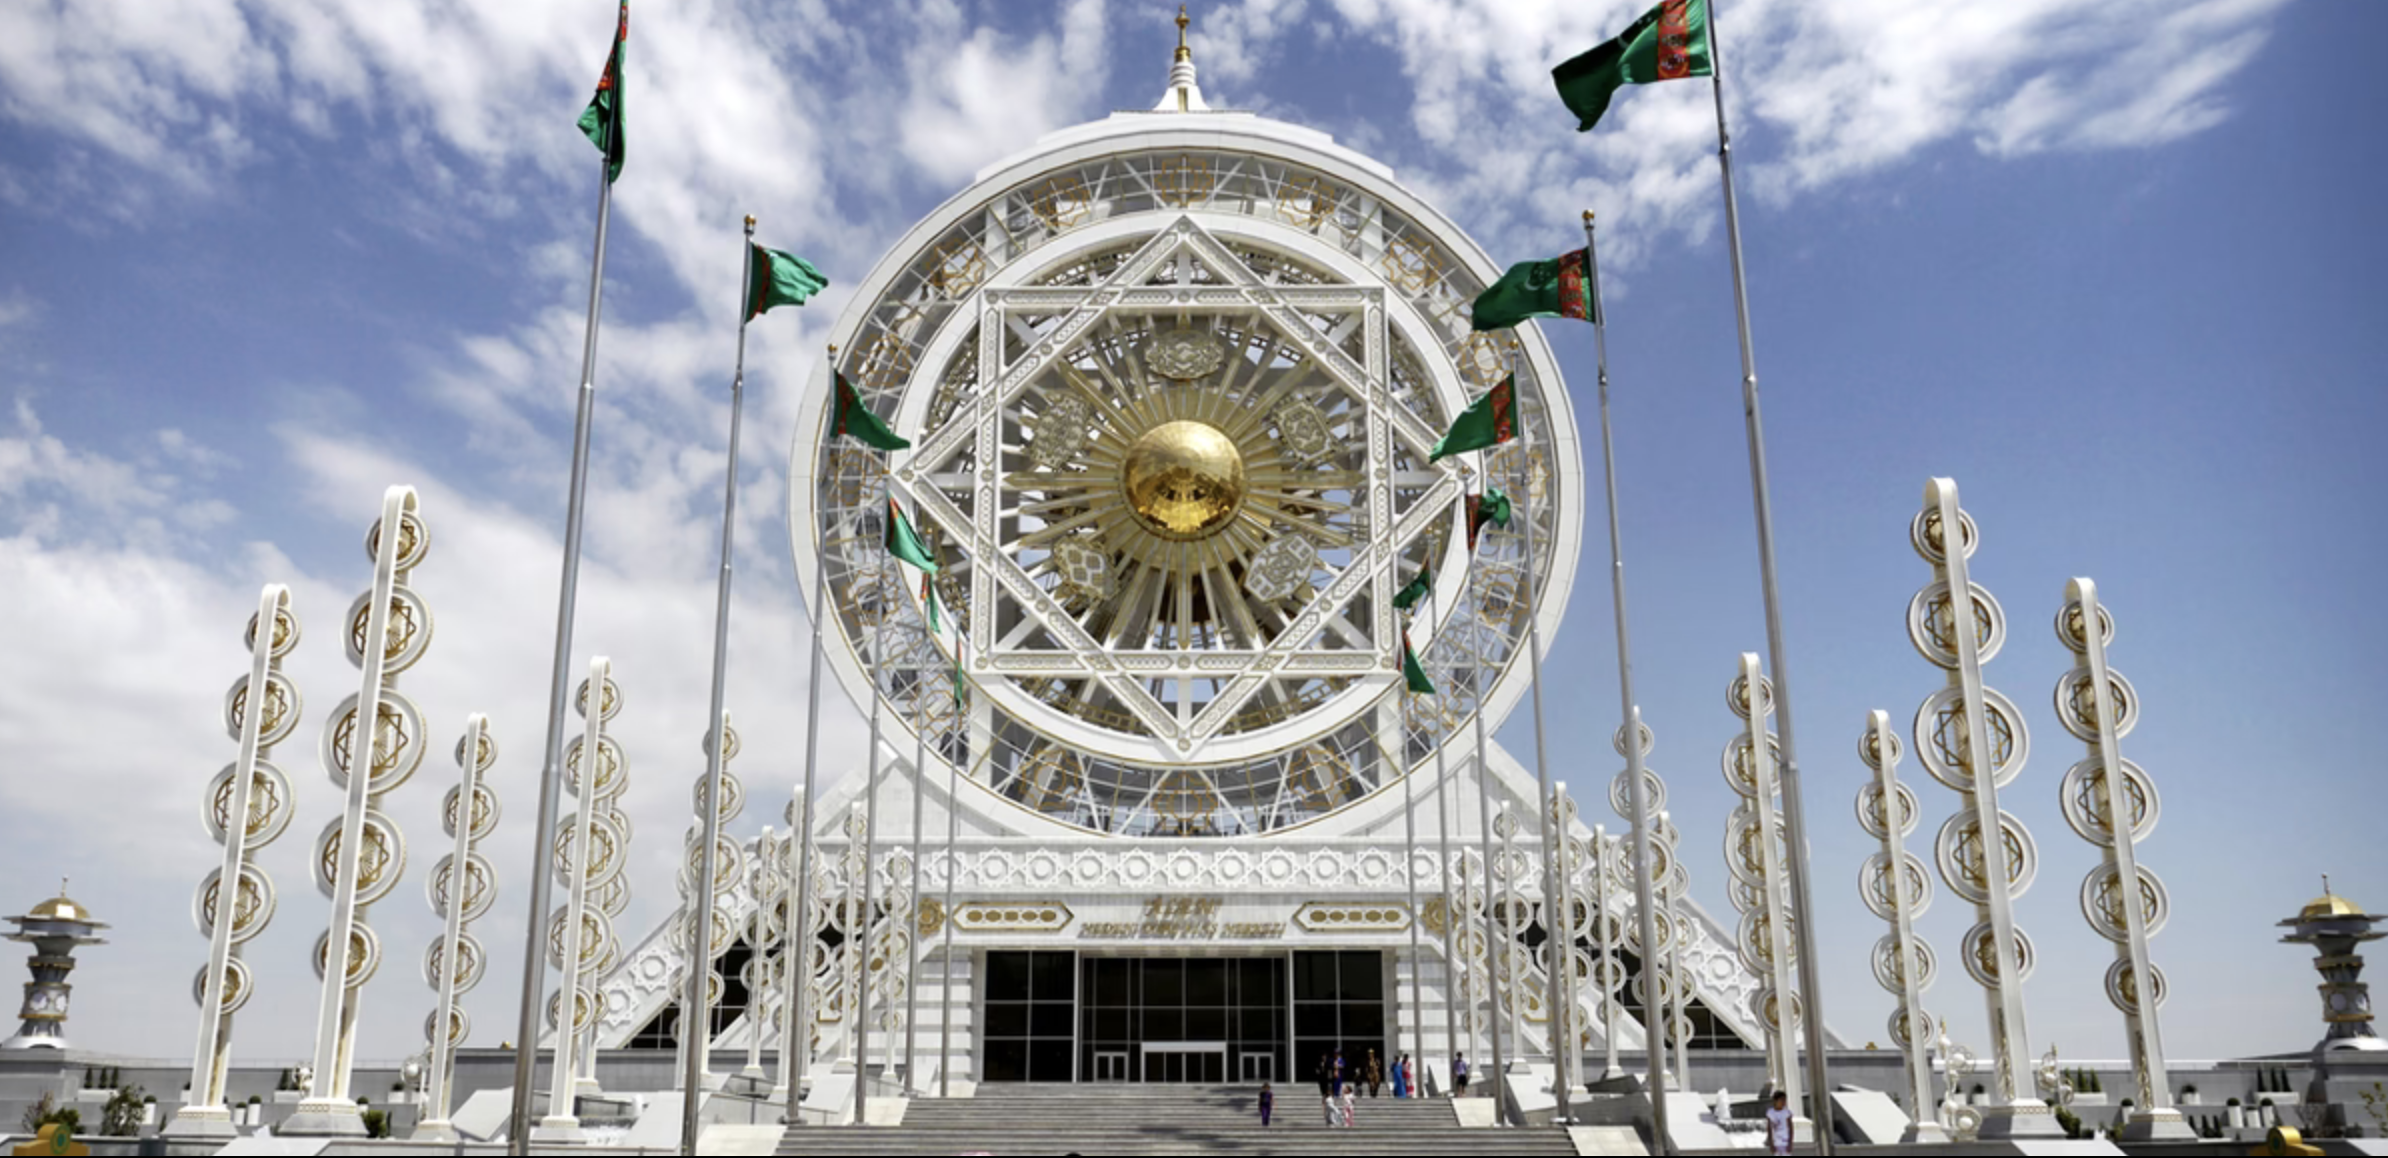 Turkmenistan is not a typical tourist destination! shgabat was recently noted by the Guinness Book of World Records as having the most white marble-clad buildings in the world